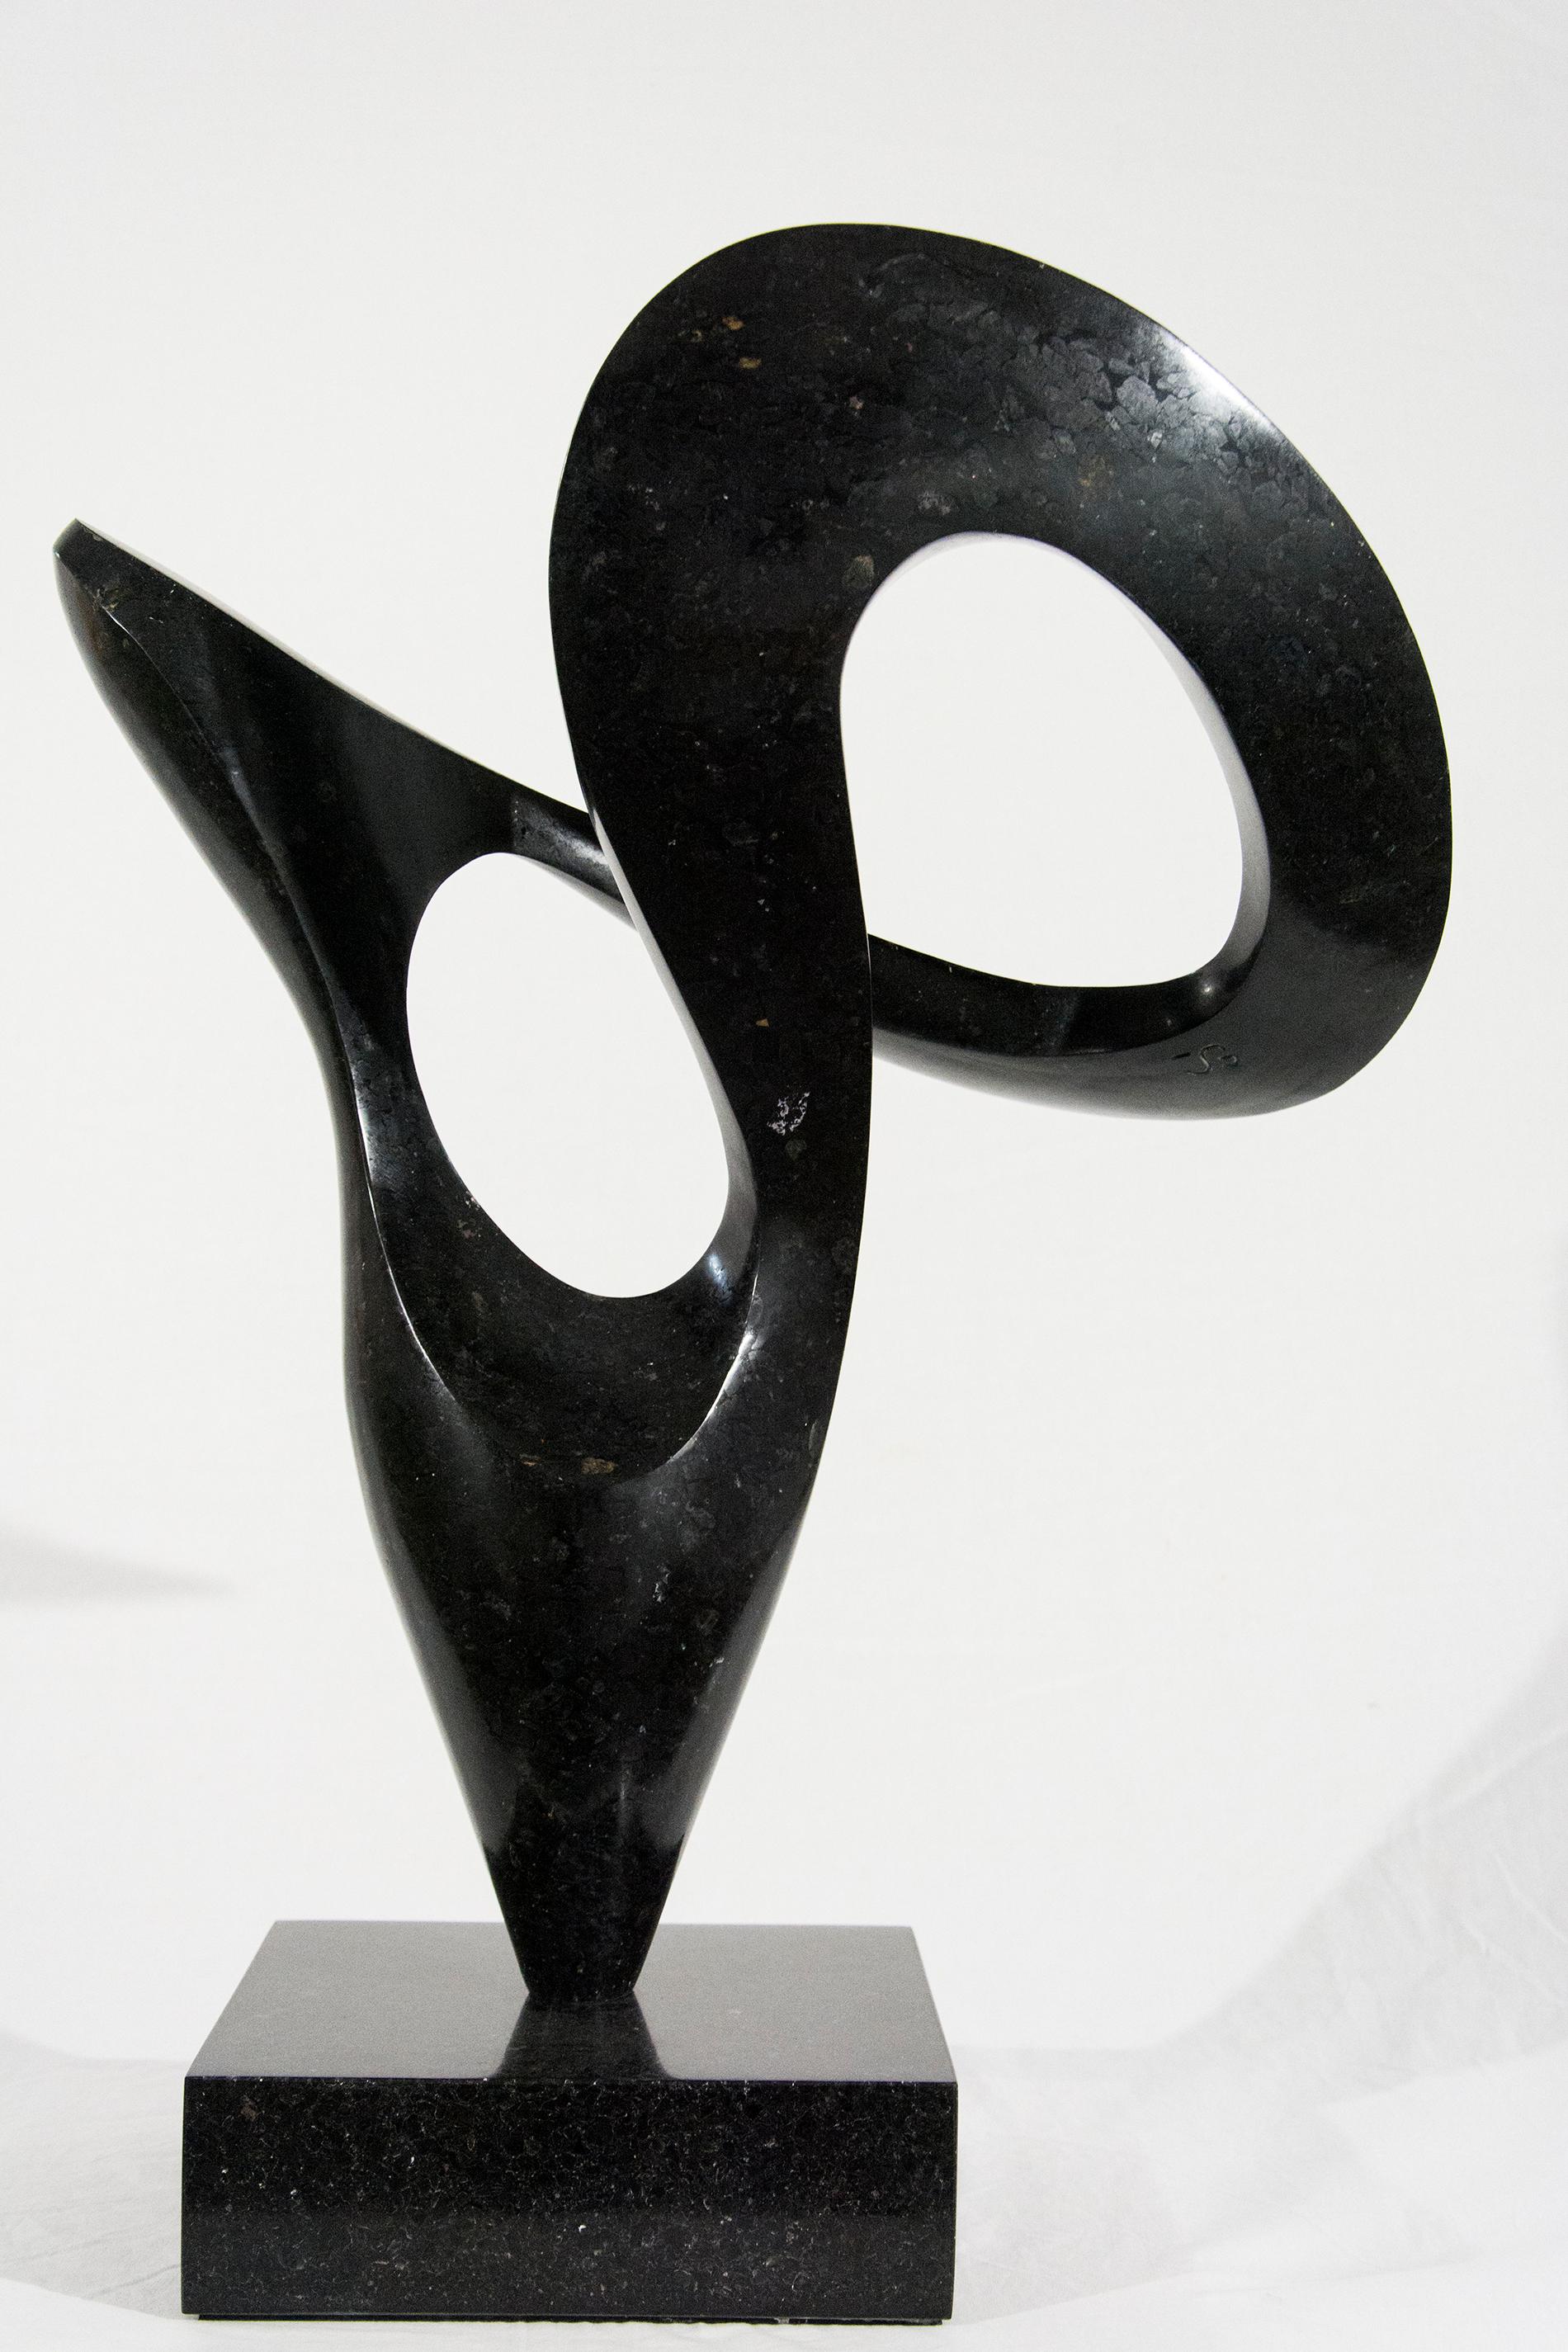 Pirouette 18/50 - smooth, black, granite, indoor/outdoor, abstract sculpture - Sculpture by Jeremy Guy